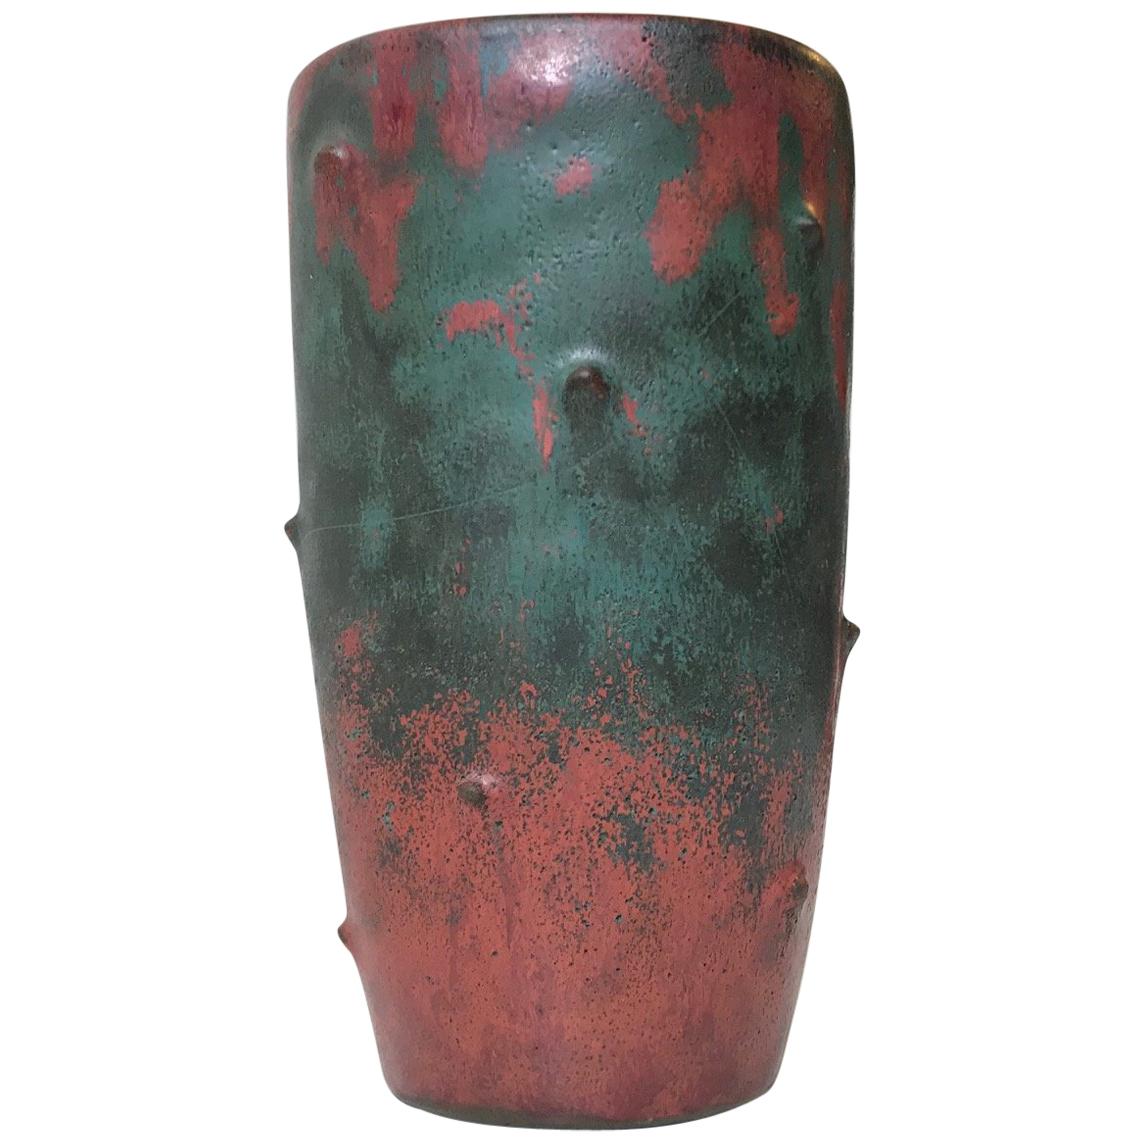 Art Deco Pottery Vase with Camou-Glaze by Niels Peter Nielsen for Dagnaes, 1940s